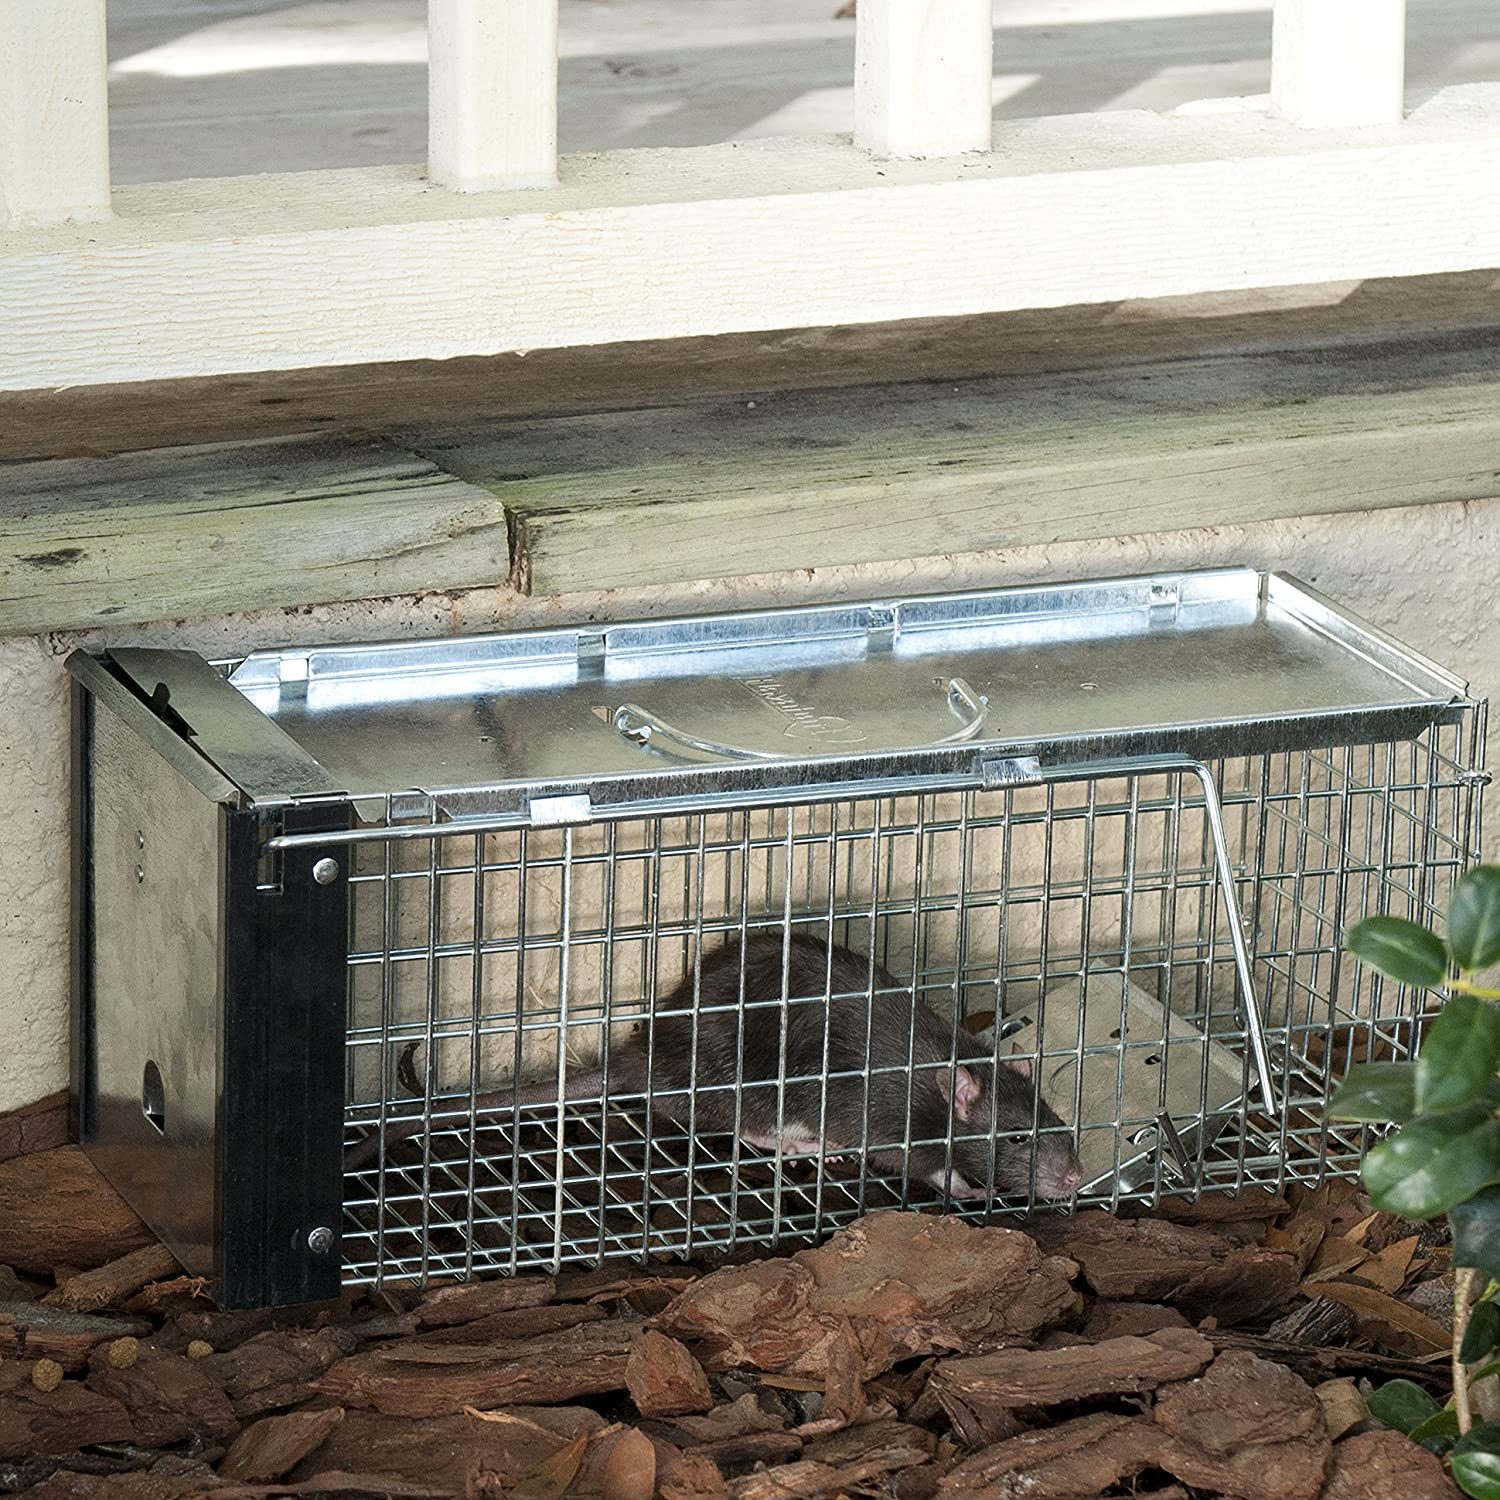 Live Animal Trap - What's The Best Choice?